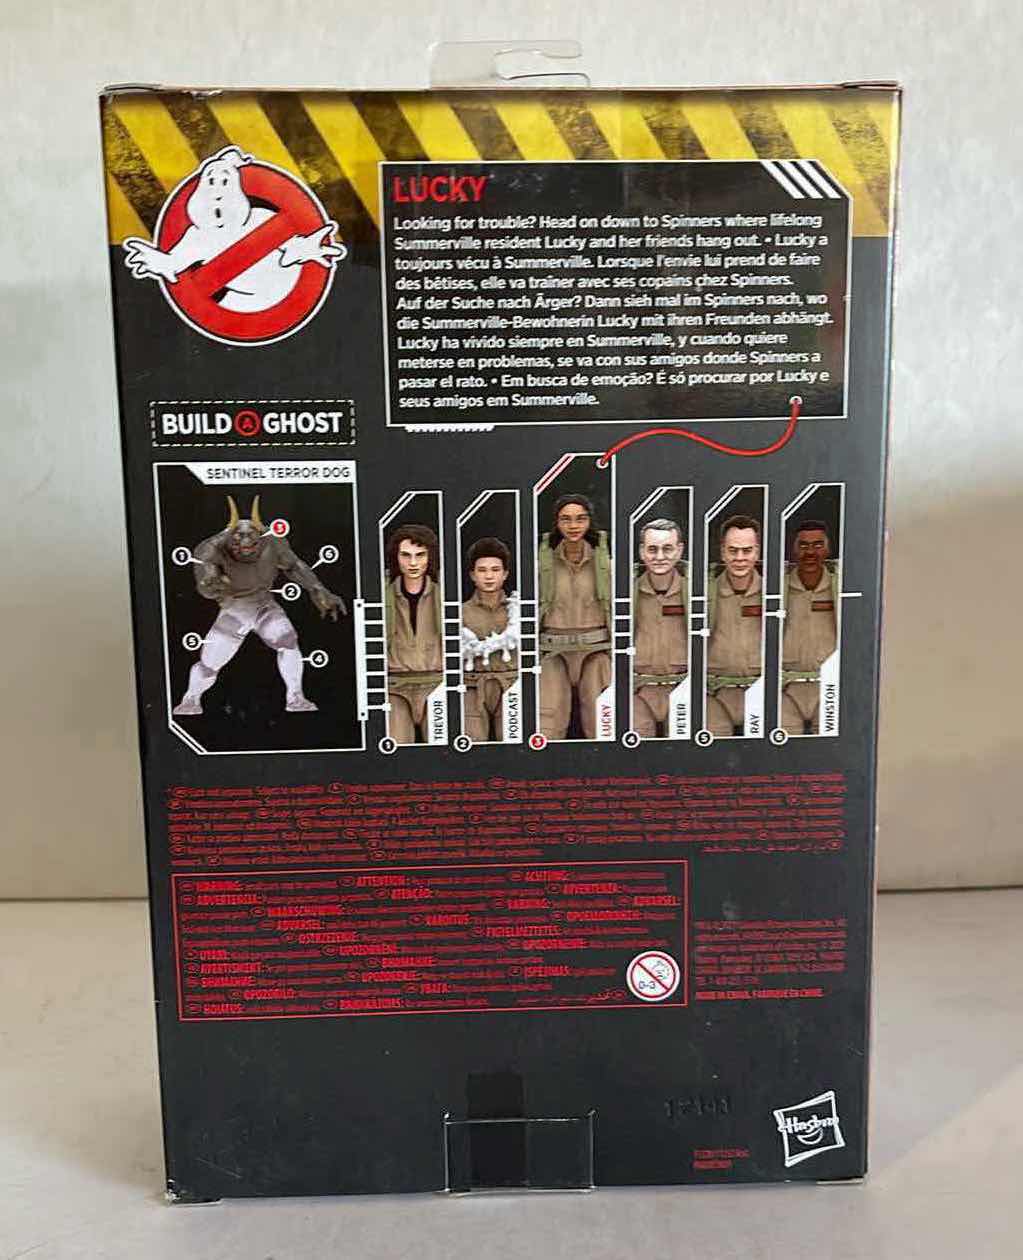 Photo 2 of NIB GHOSTBUSTERS PLASMA SERIES LUCKY COLLECTIBLE AFTER LIFE ACTION FIGURE - RETAIL PRICE- $25.99